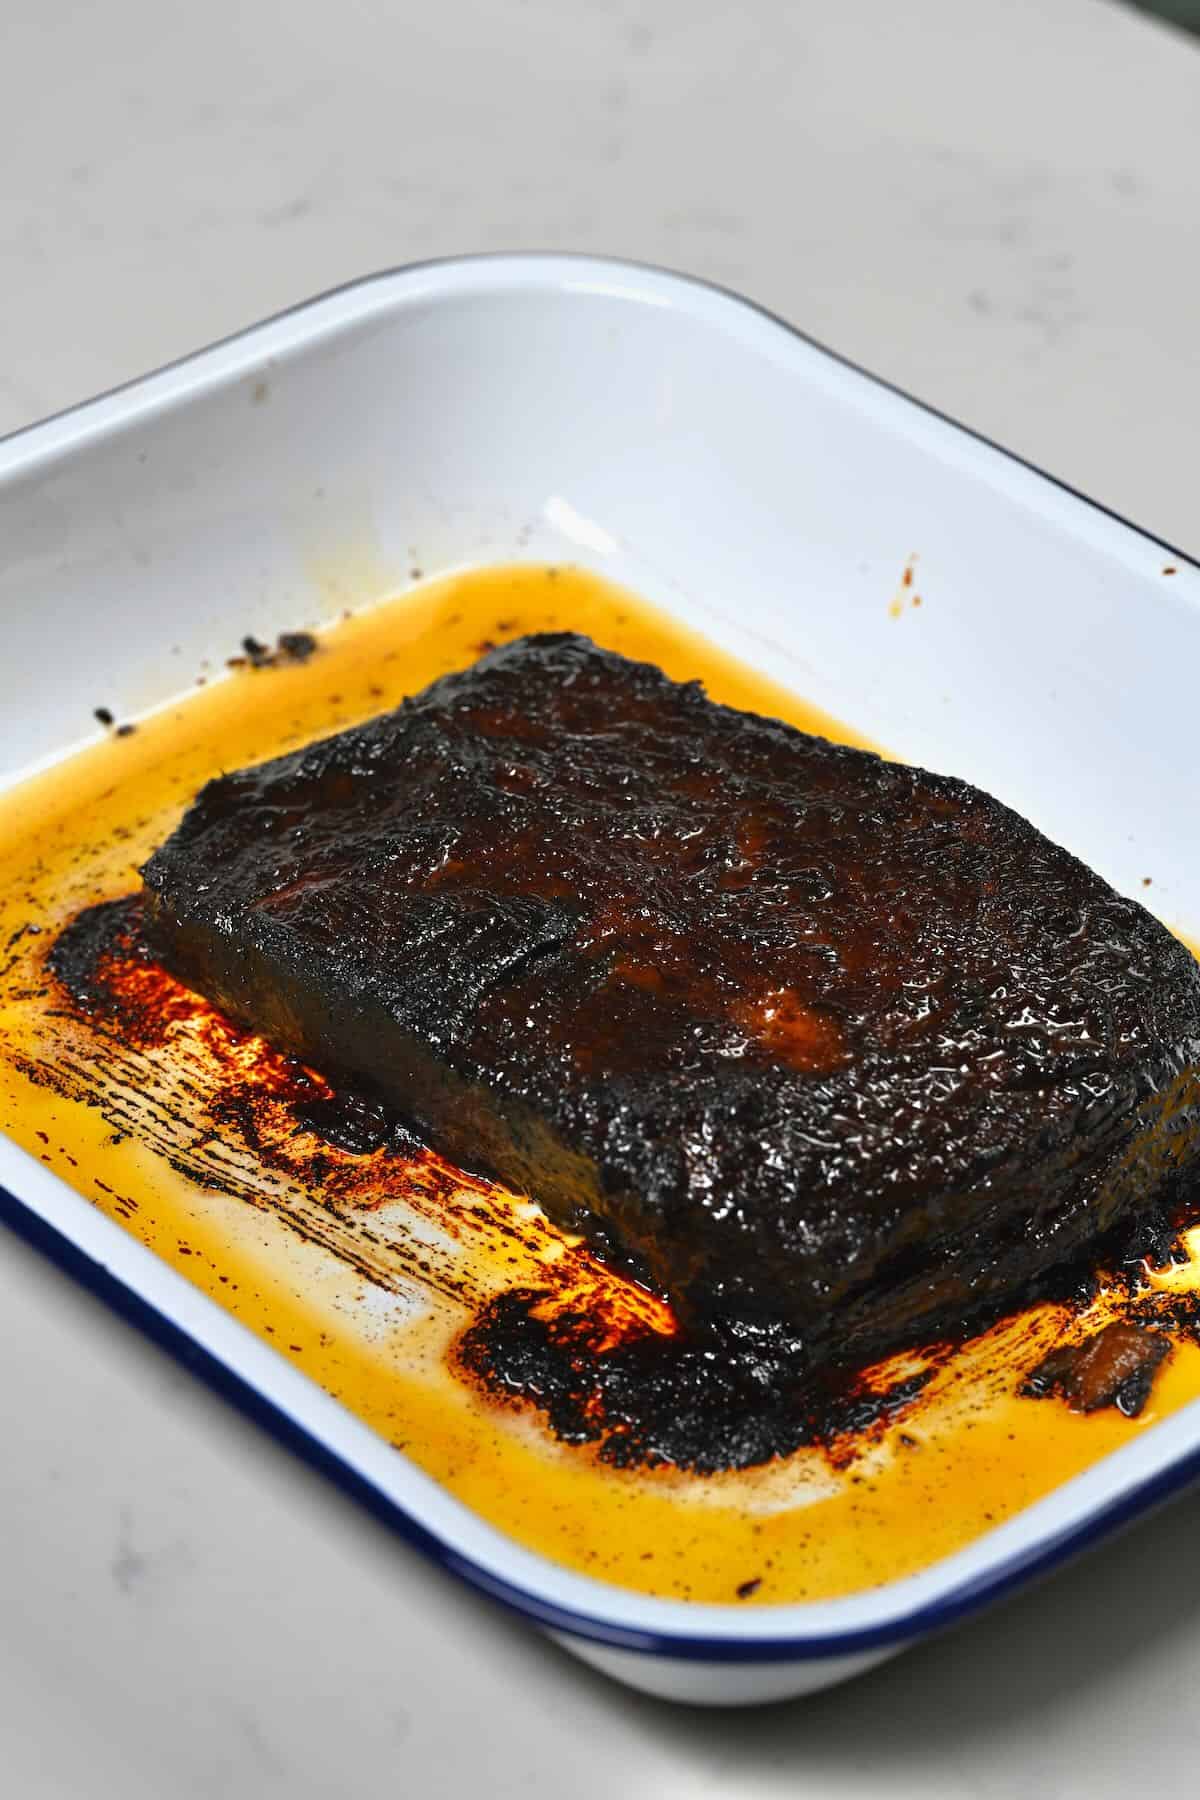 Brisket caramelized in the oven